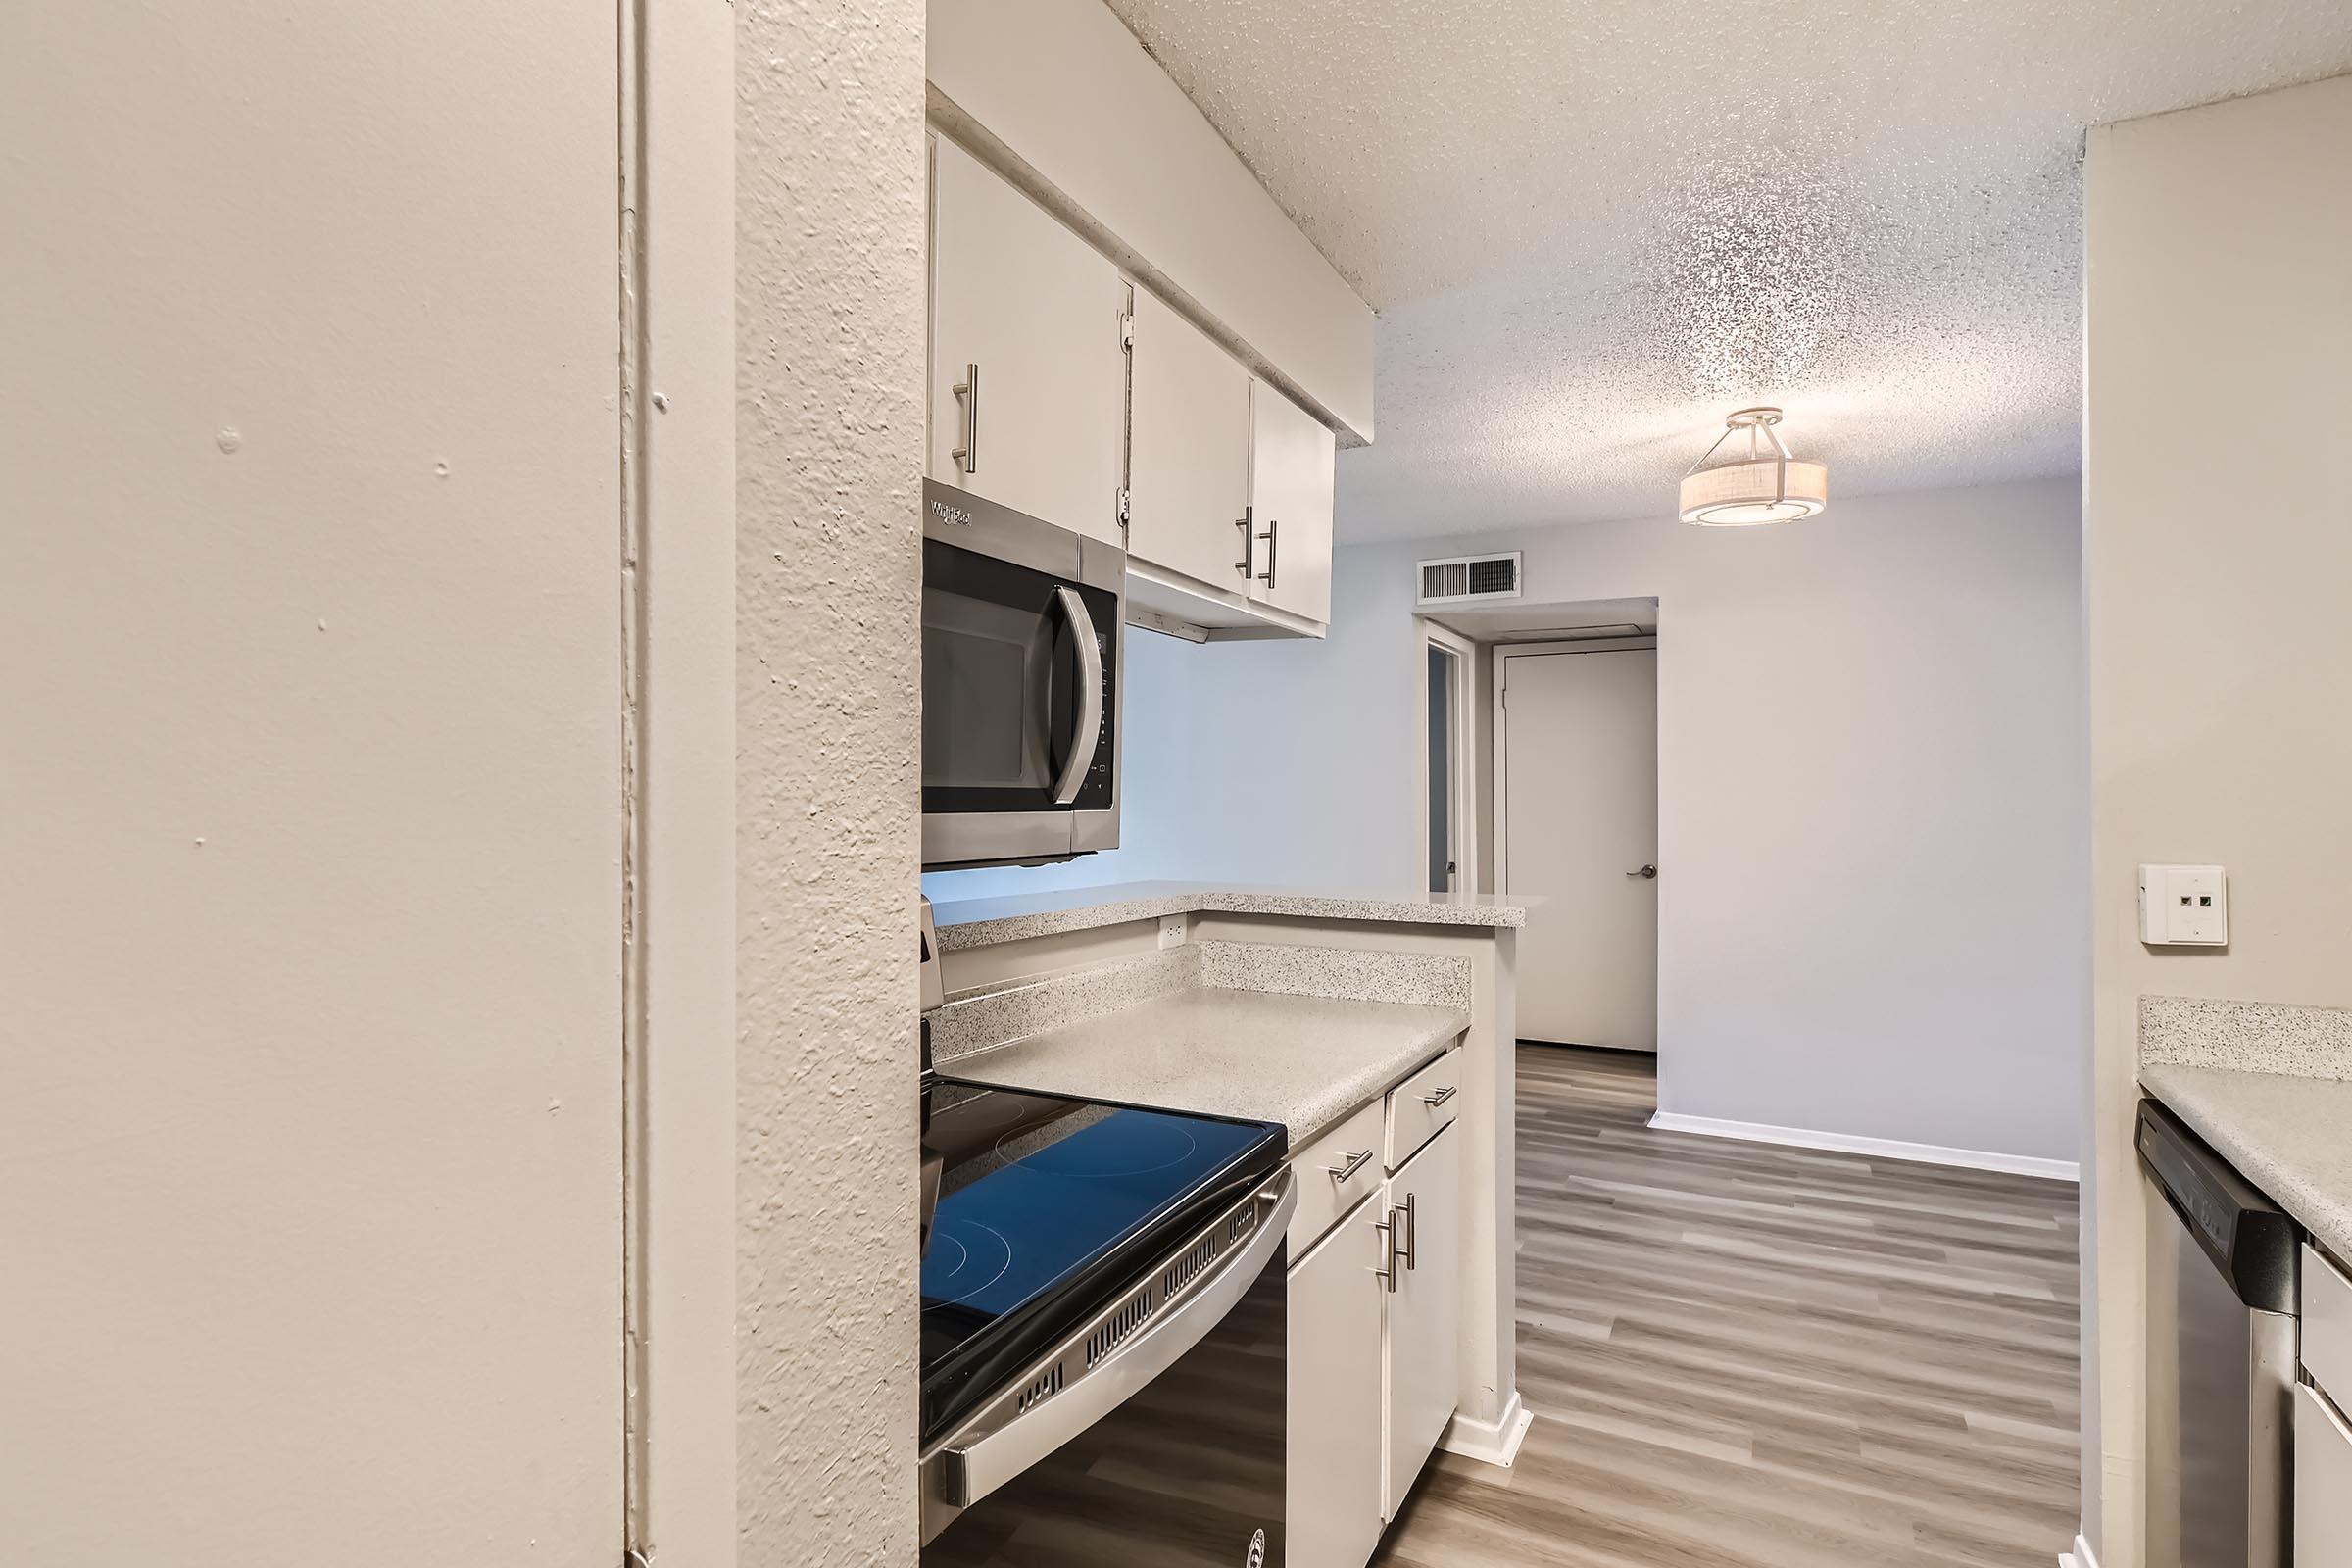 An apartment kitchen with white cabinets and stainless steel appliances at Rise North Arlington.